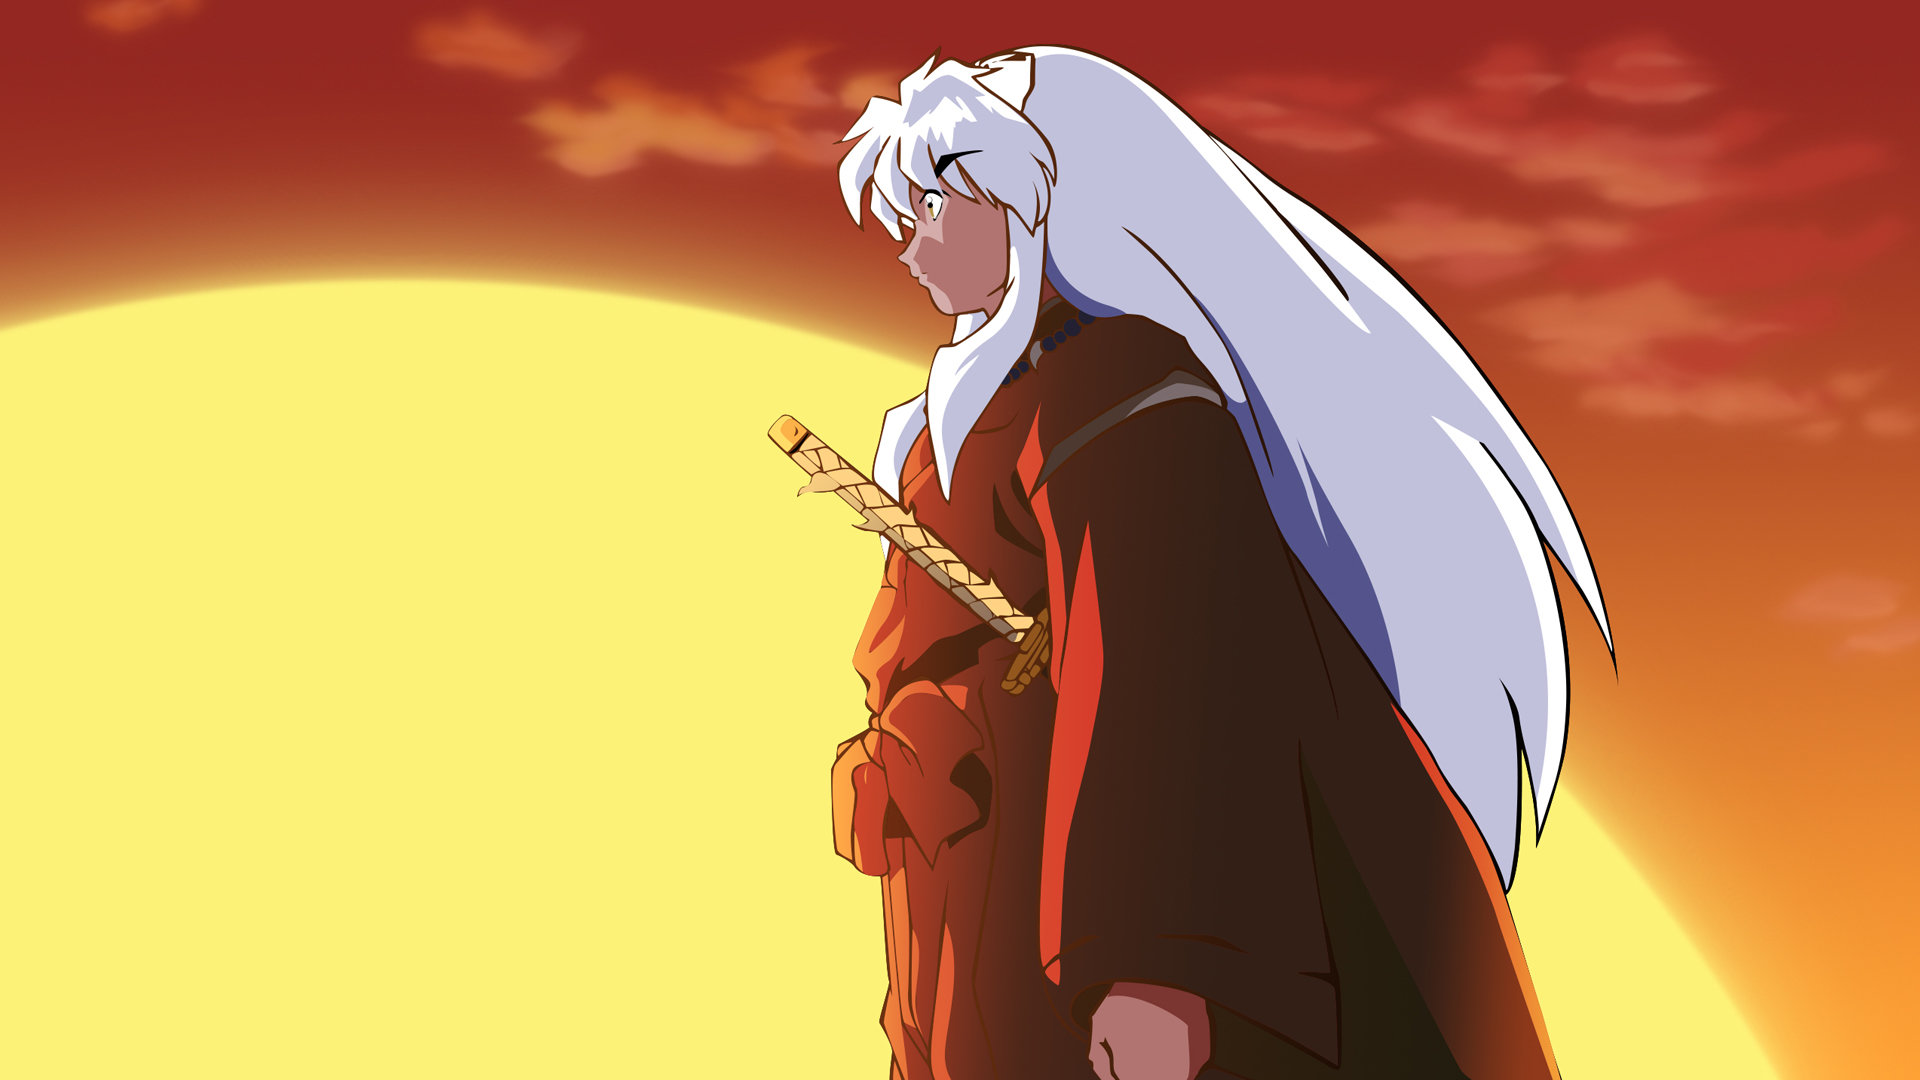 Download full hd 1920x1080 InuYasha PC background ID:45963 for free